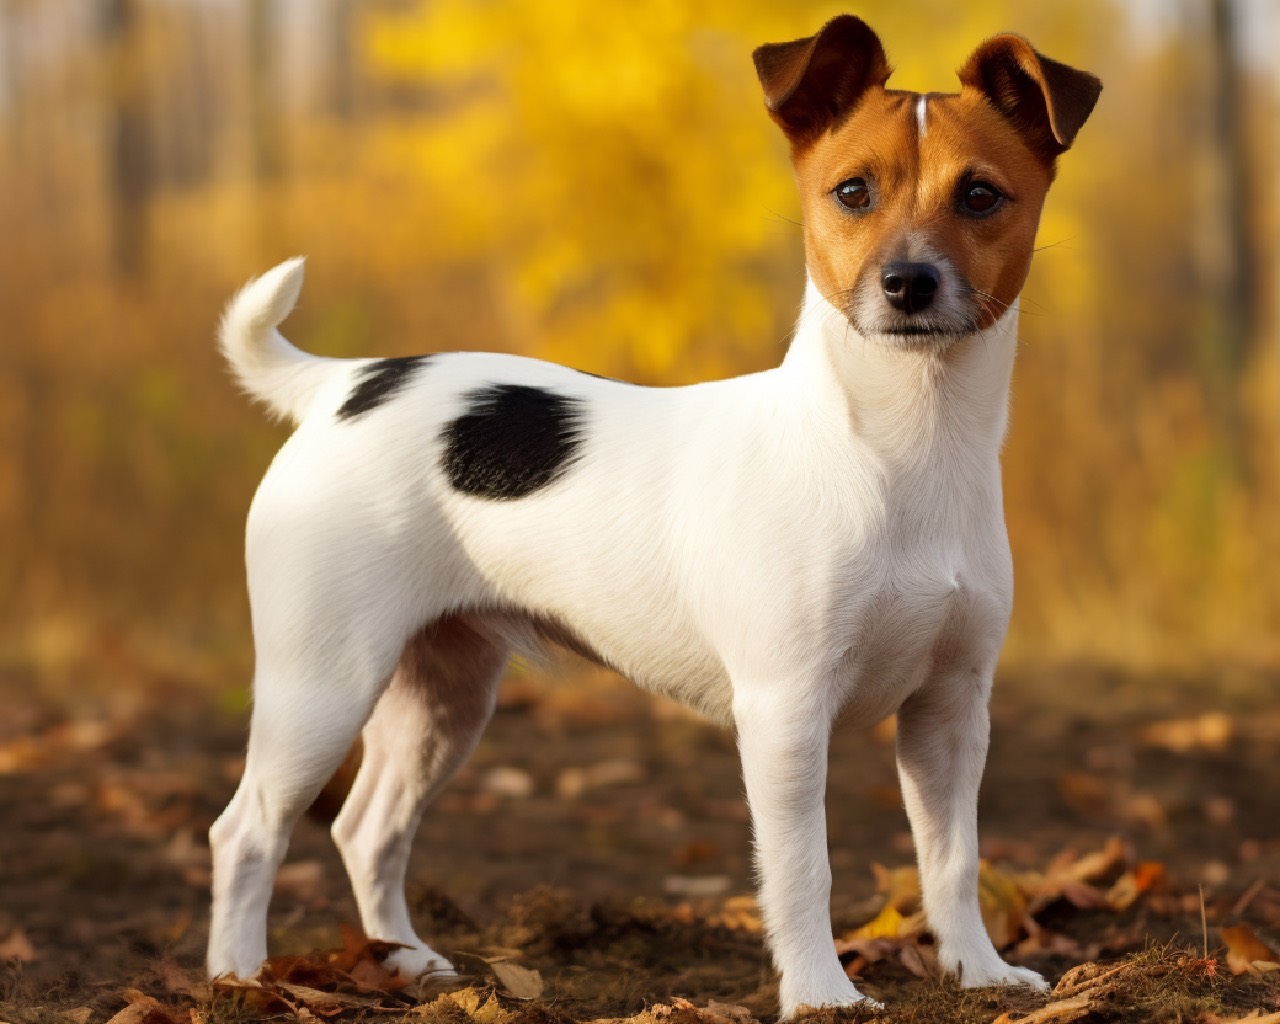 Teddy Roosevelt Terrier Dog Breed in the Park